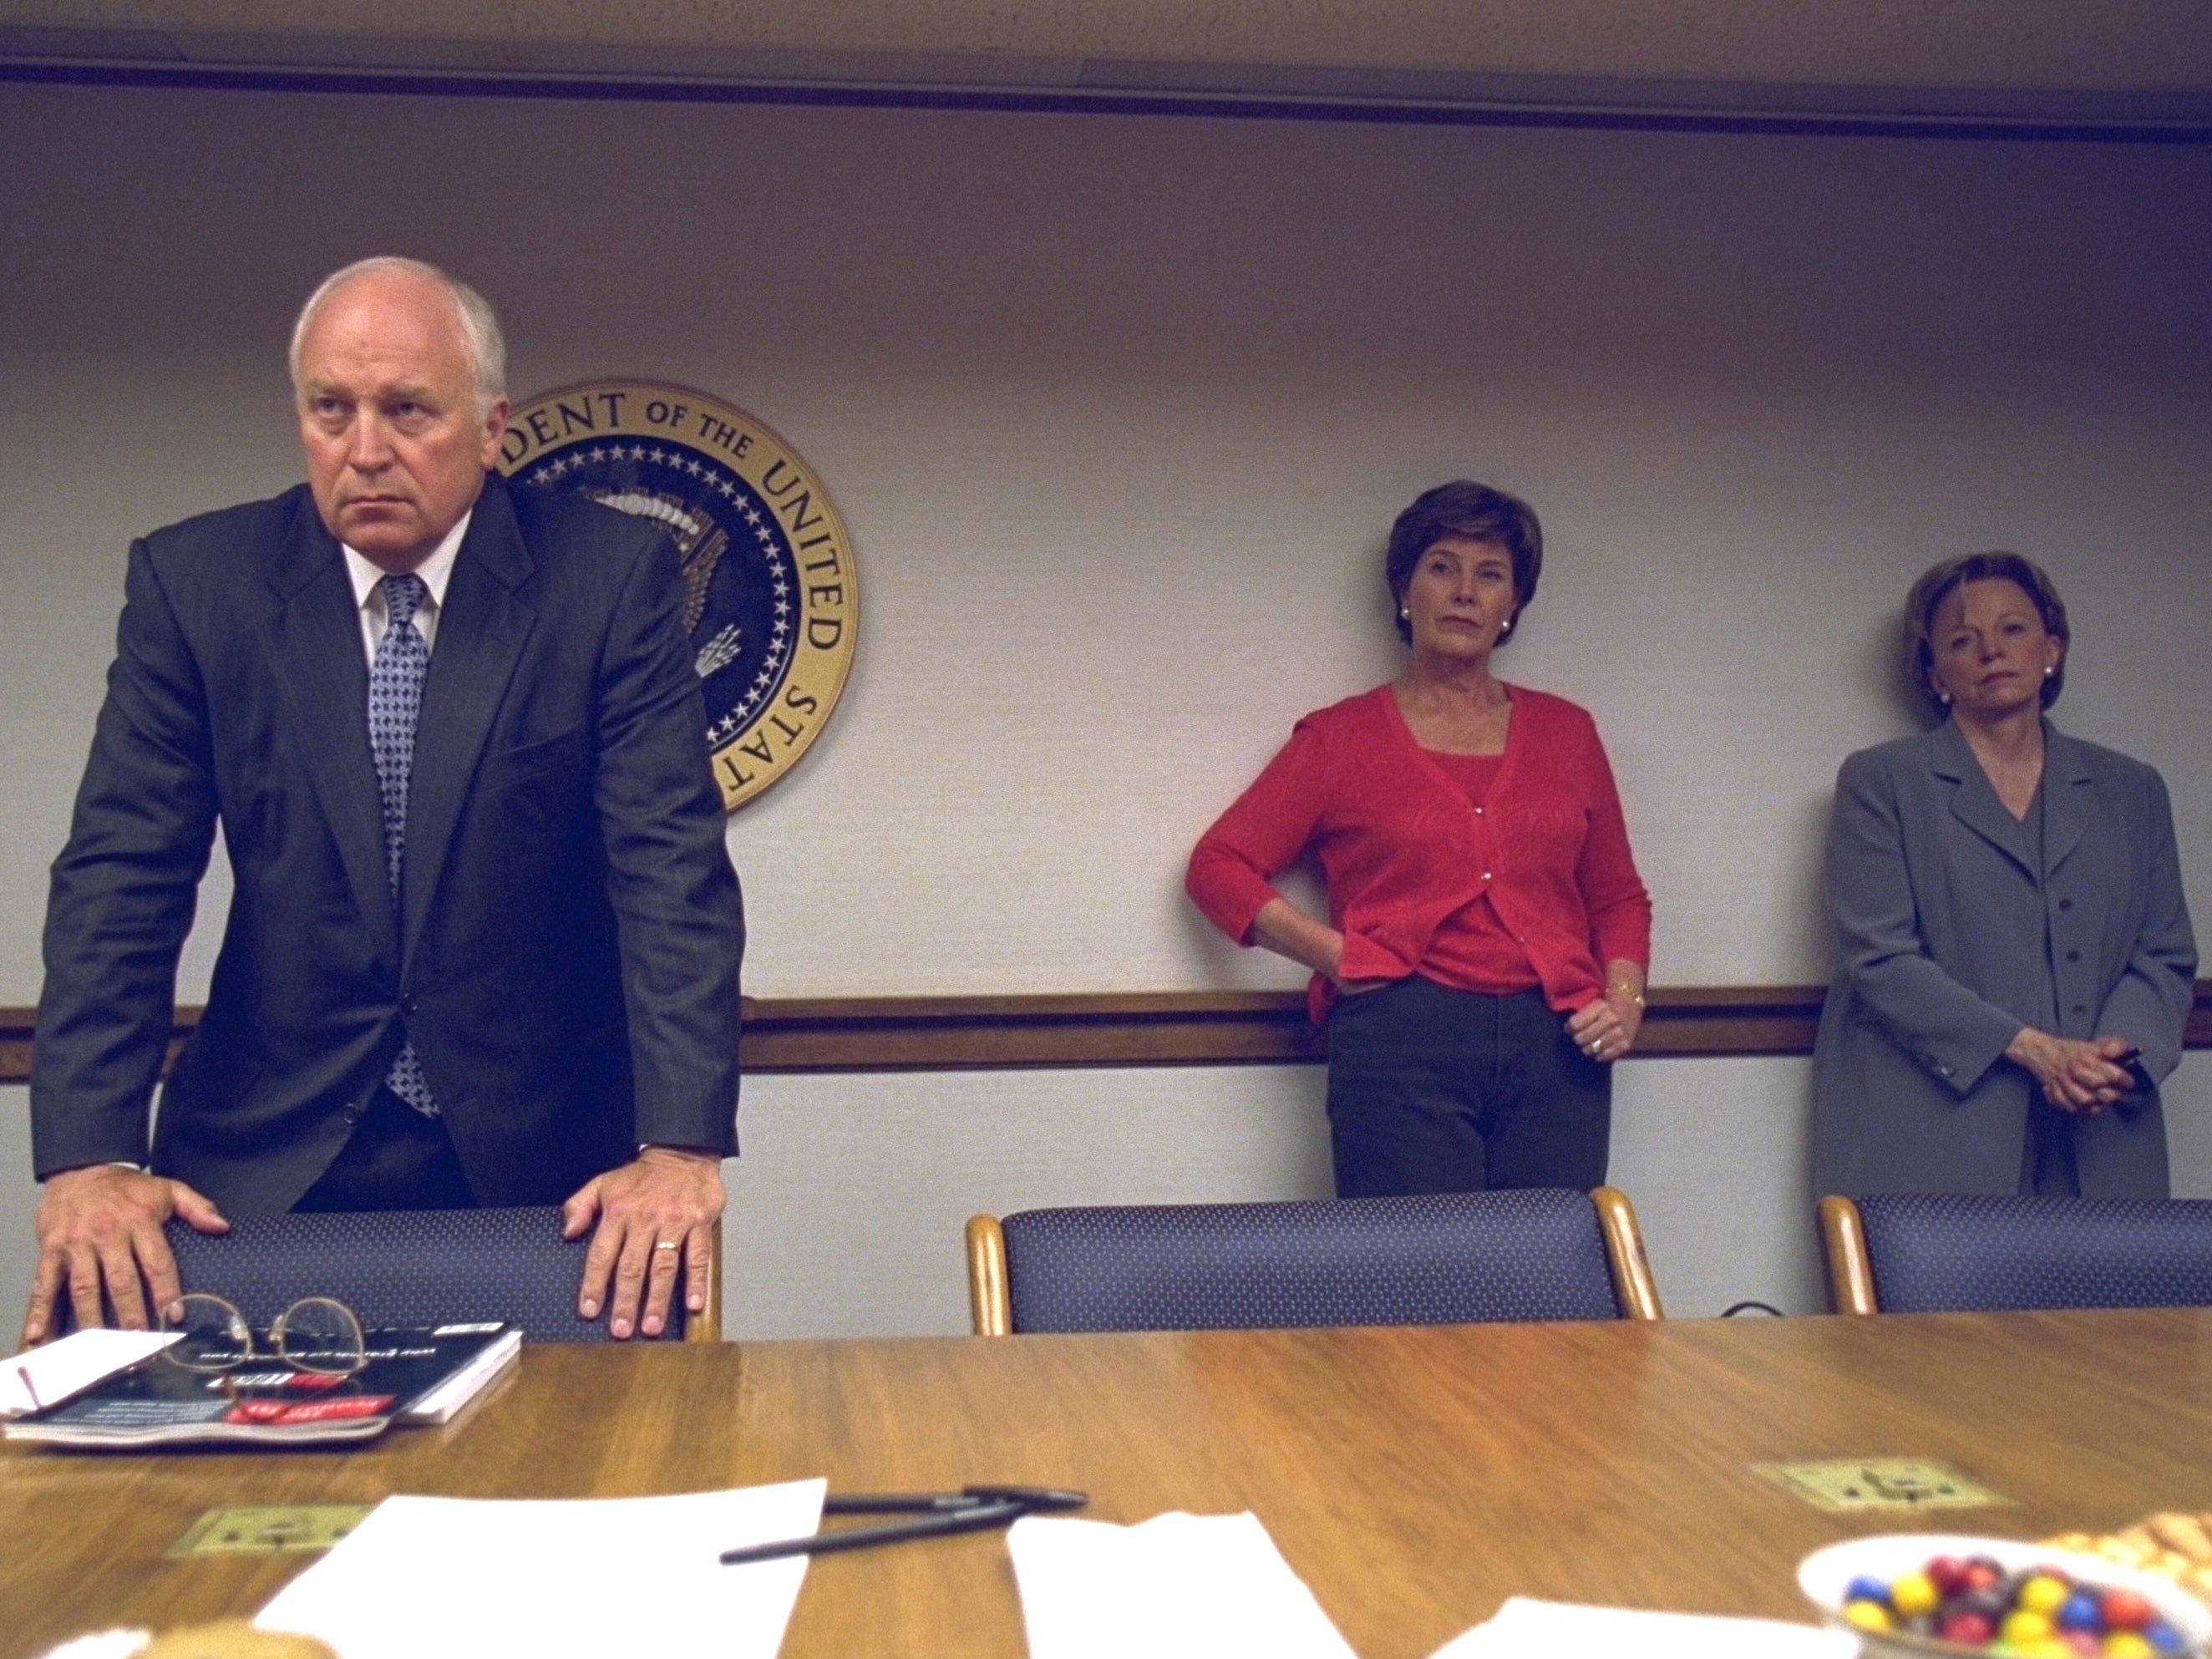 The vice-President, his wife Lynne Cheney and first lady Laura Bush during the emergency briefing